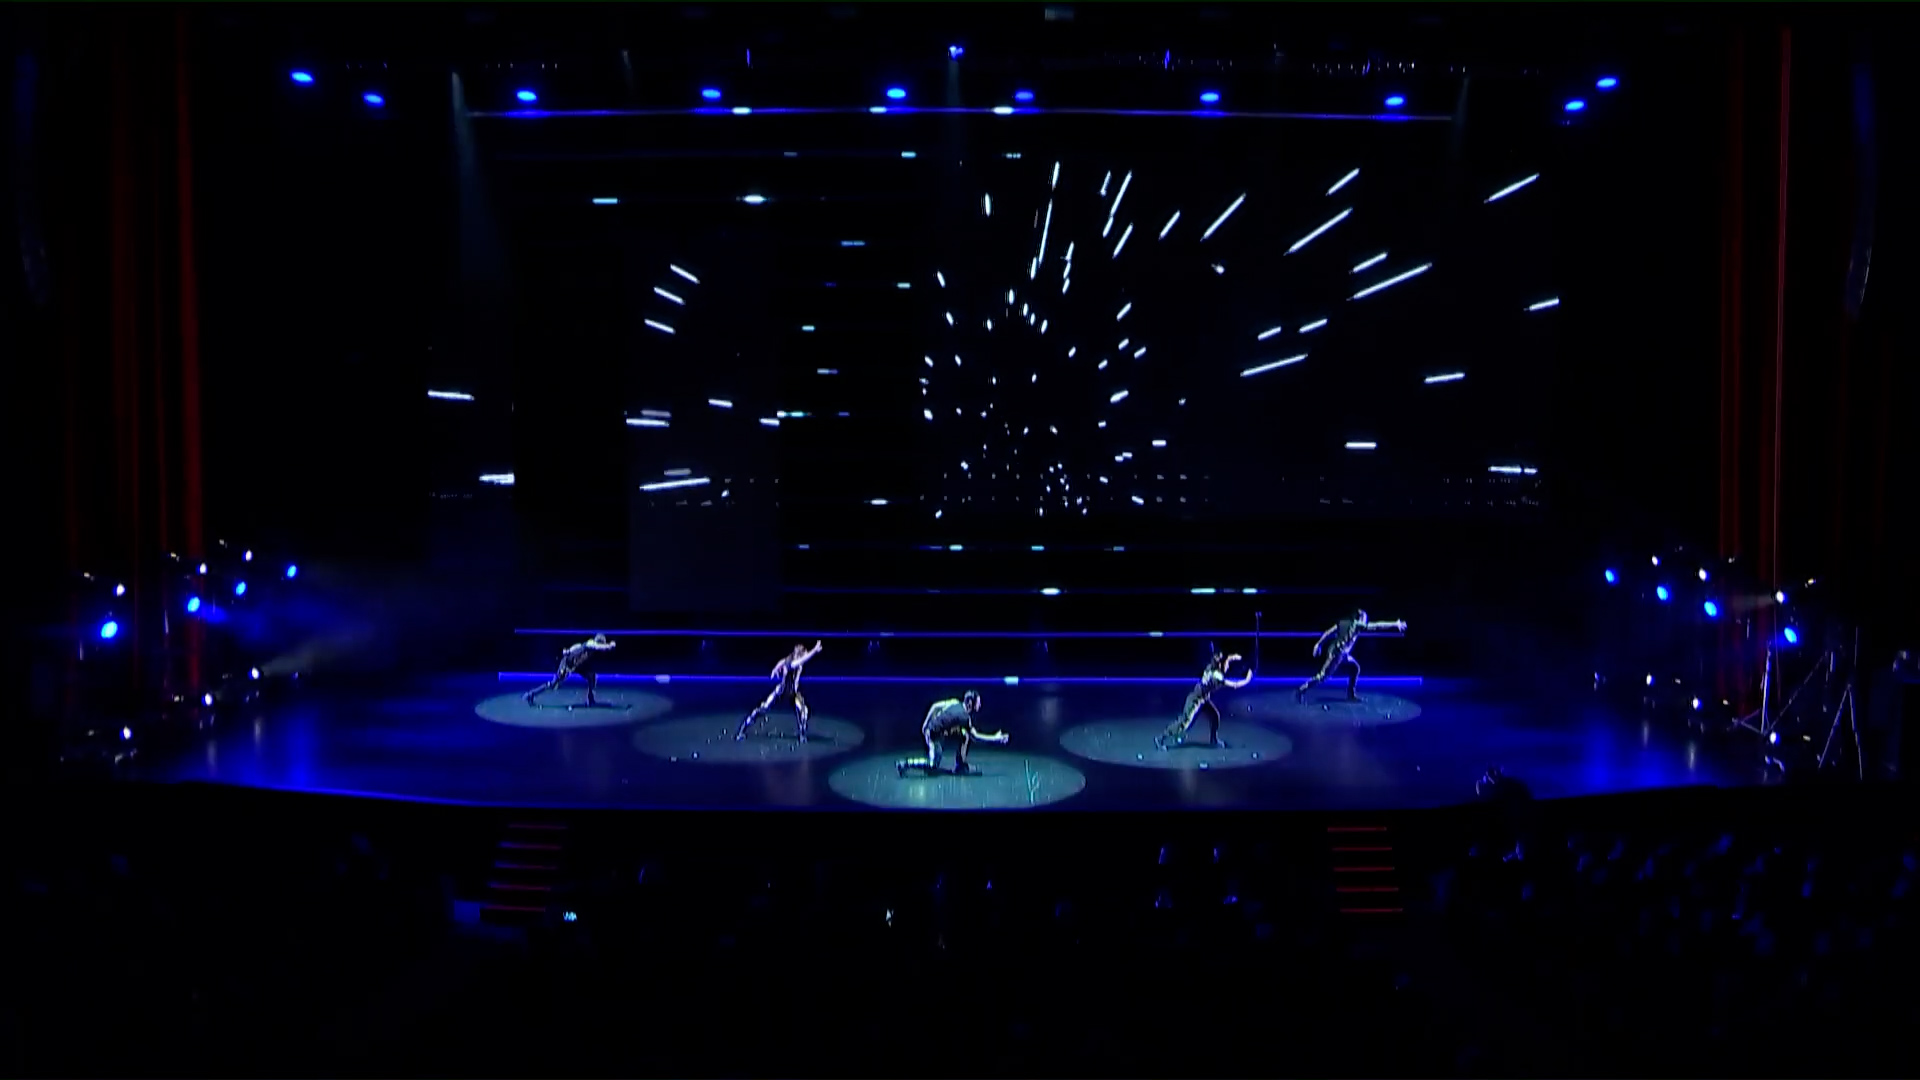 A show featuring choreographed dancers and interactive visuals.